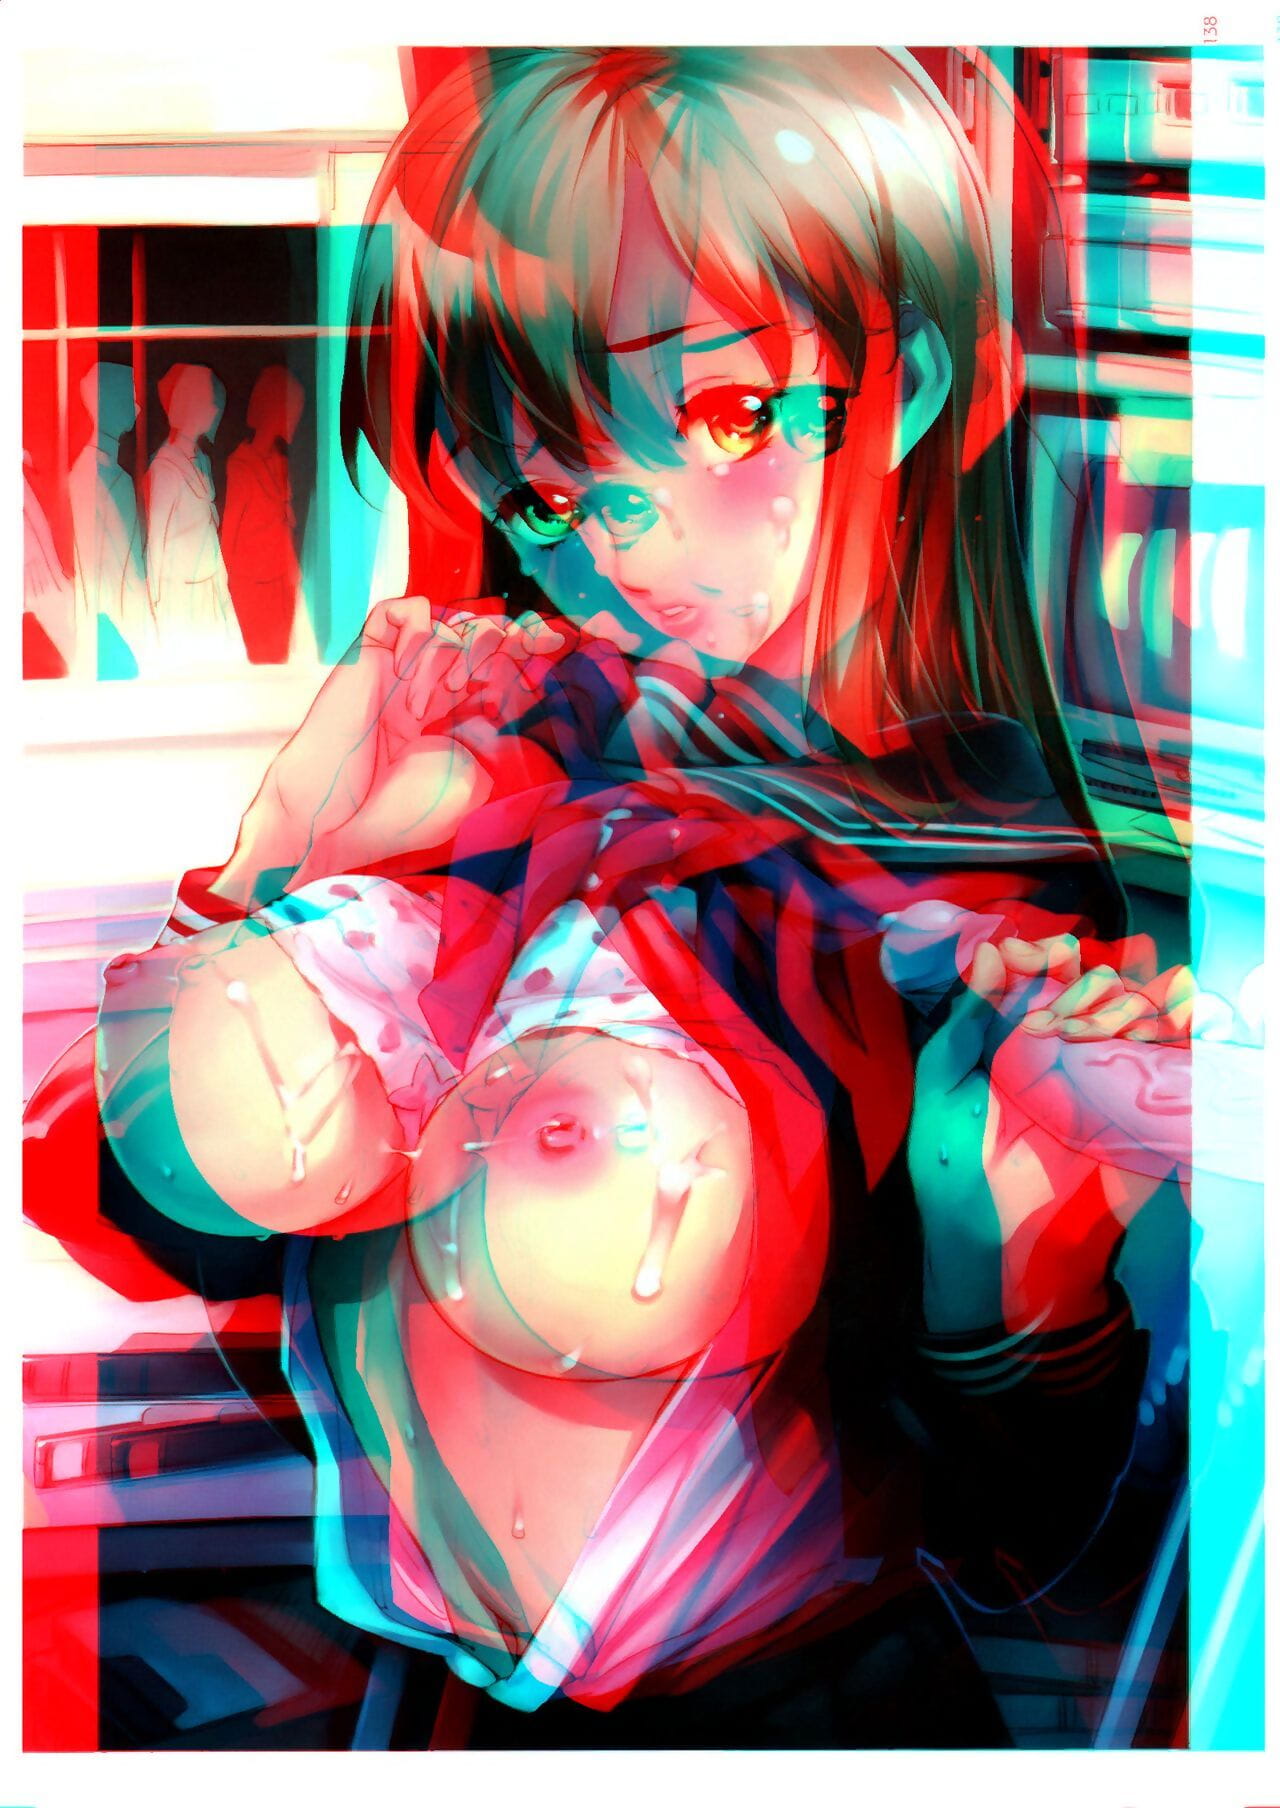 Anaglyphic 3D Pictures and GIFs - part 4